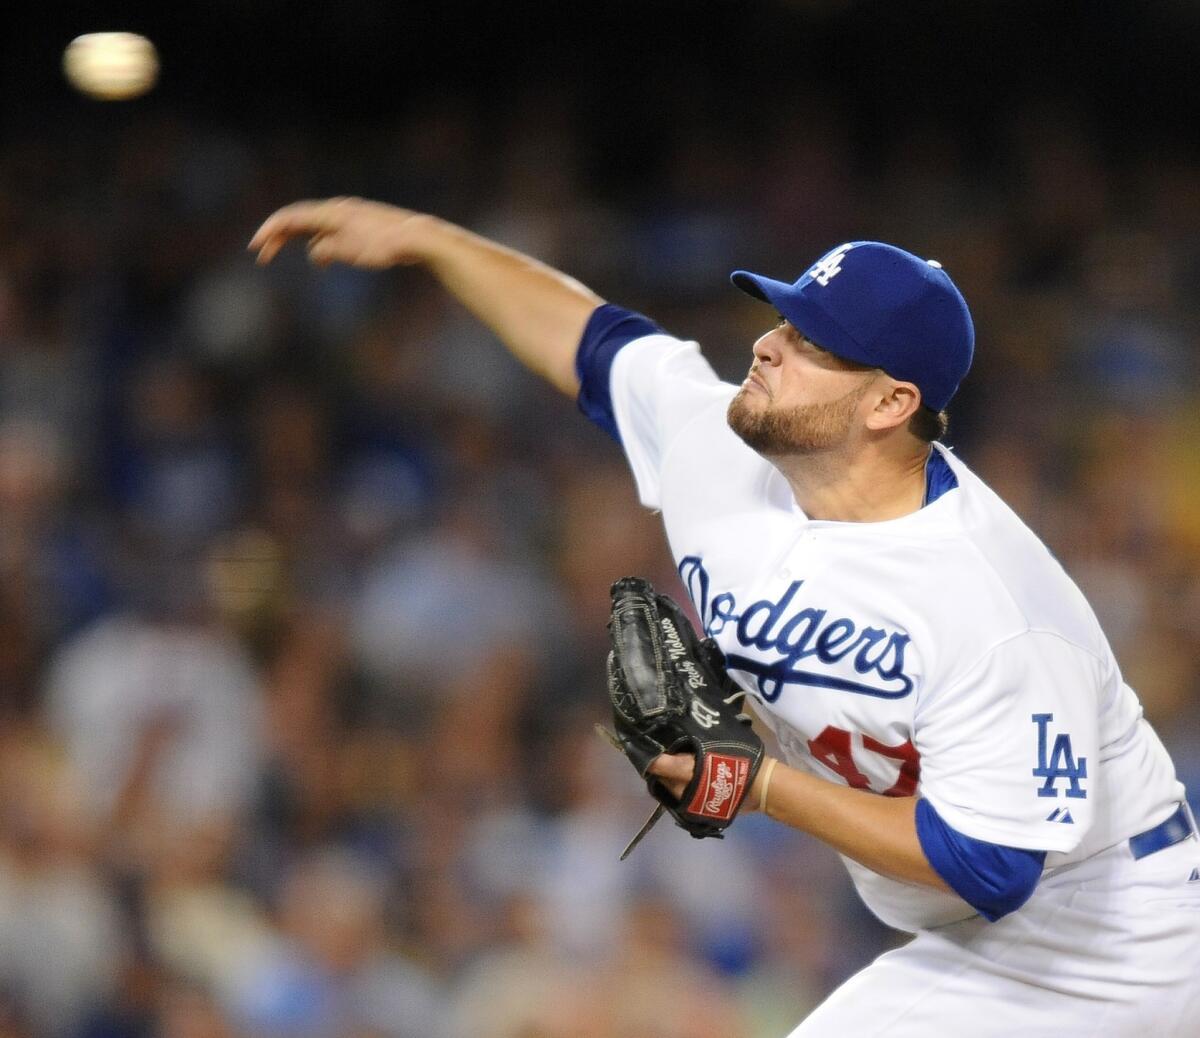 Dodgers starter Ricky Nolasco delivers a pitch during Friday's 2-0 victory over the Boston Red Sox.